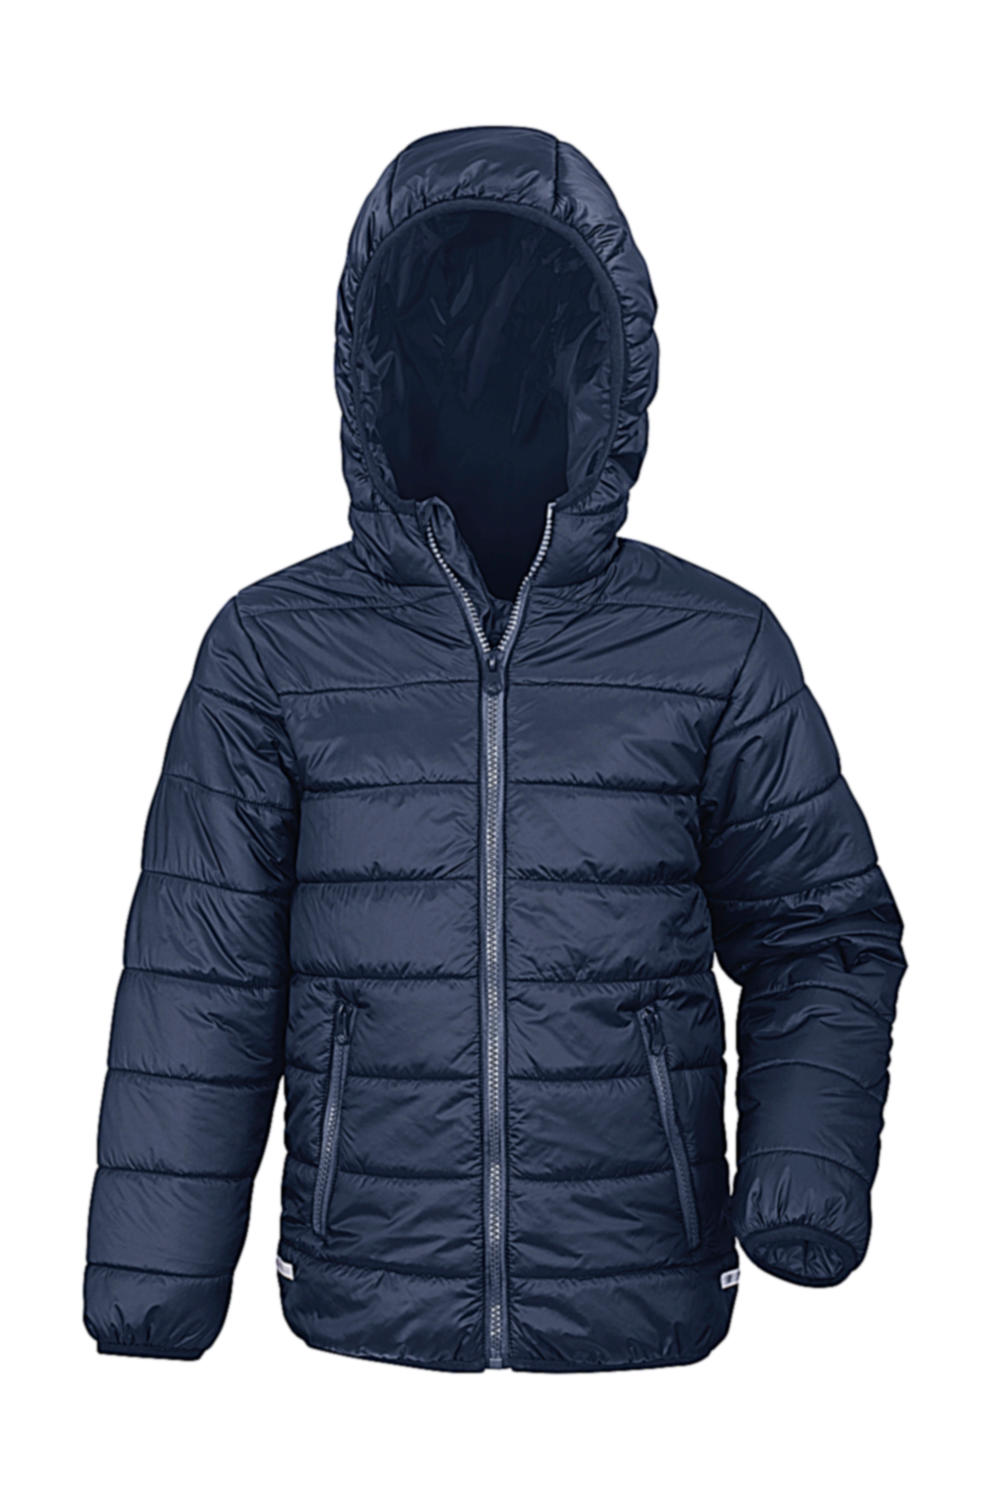  Junior/Youth Soft Padded Jacket in Farbe Navy